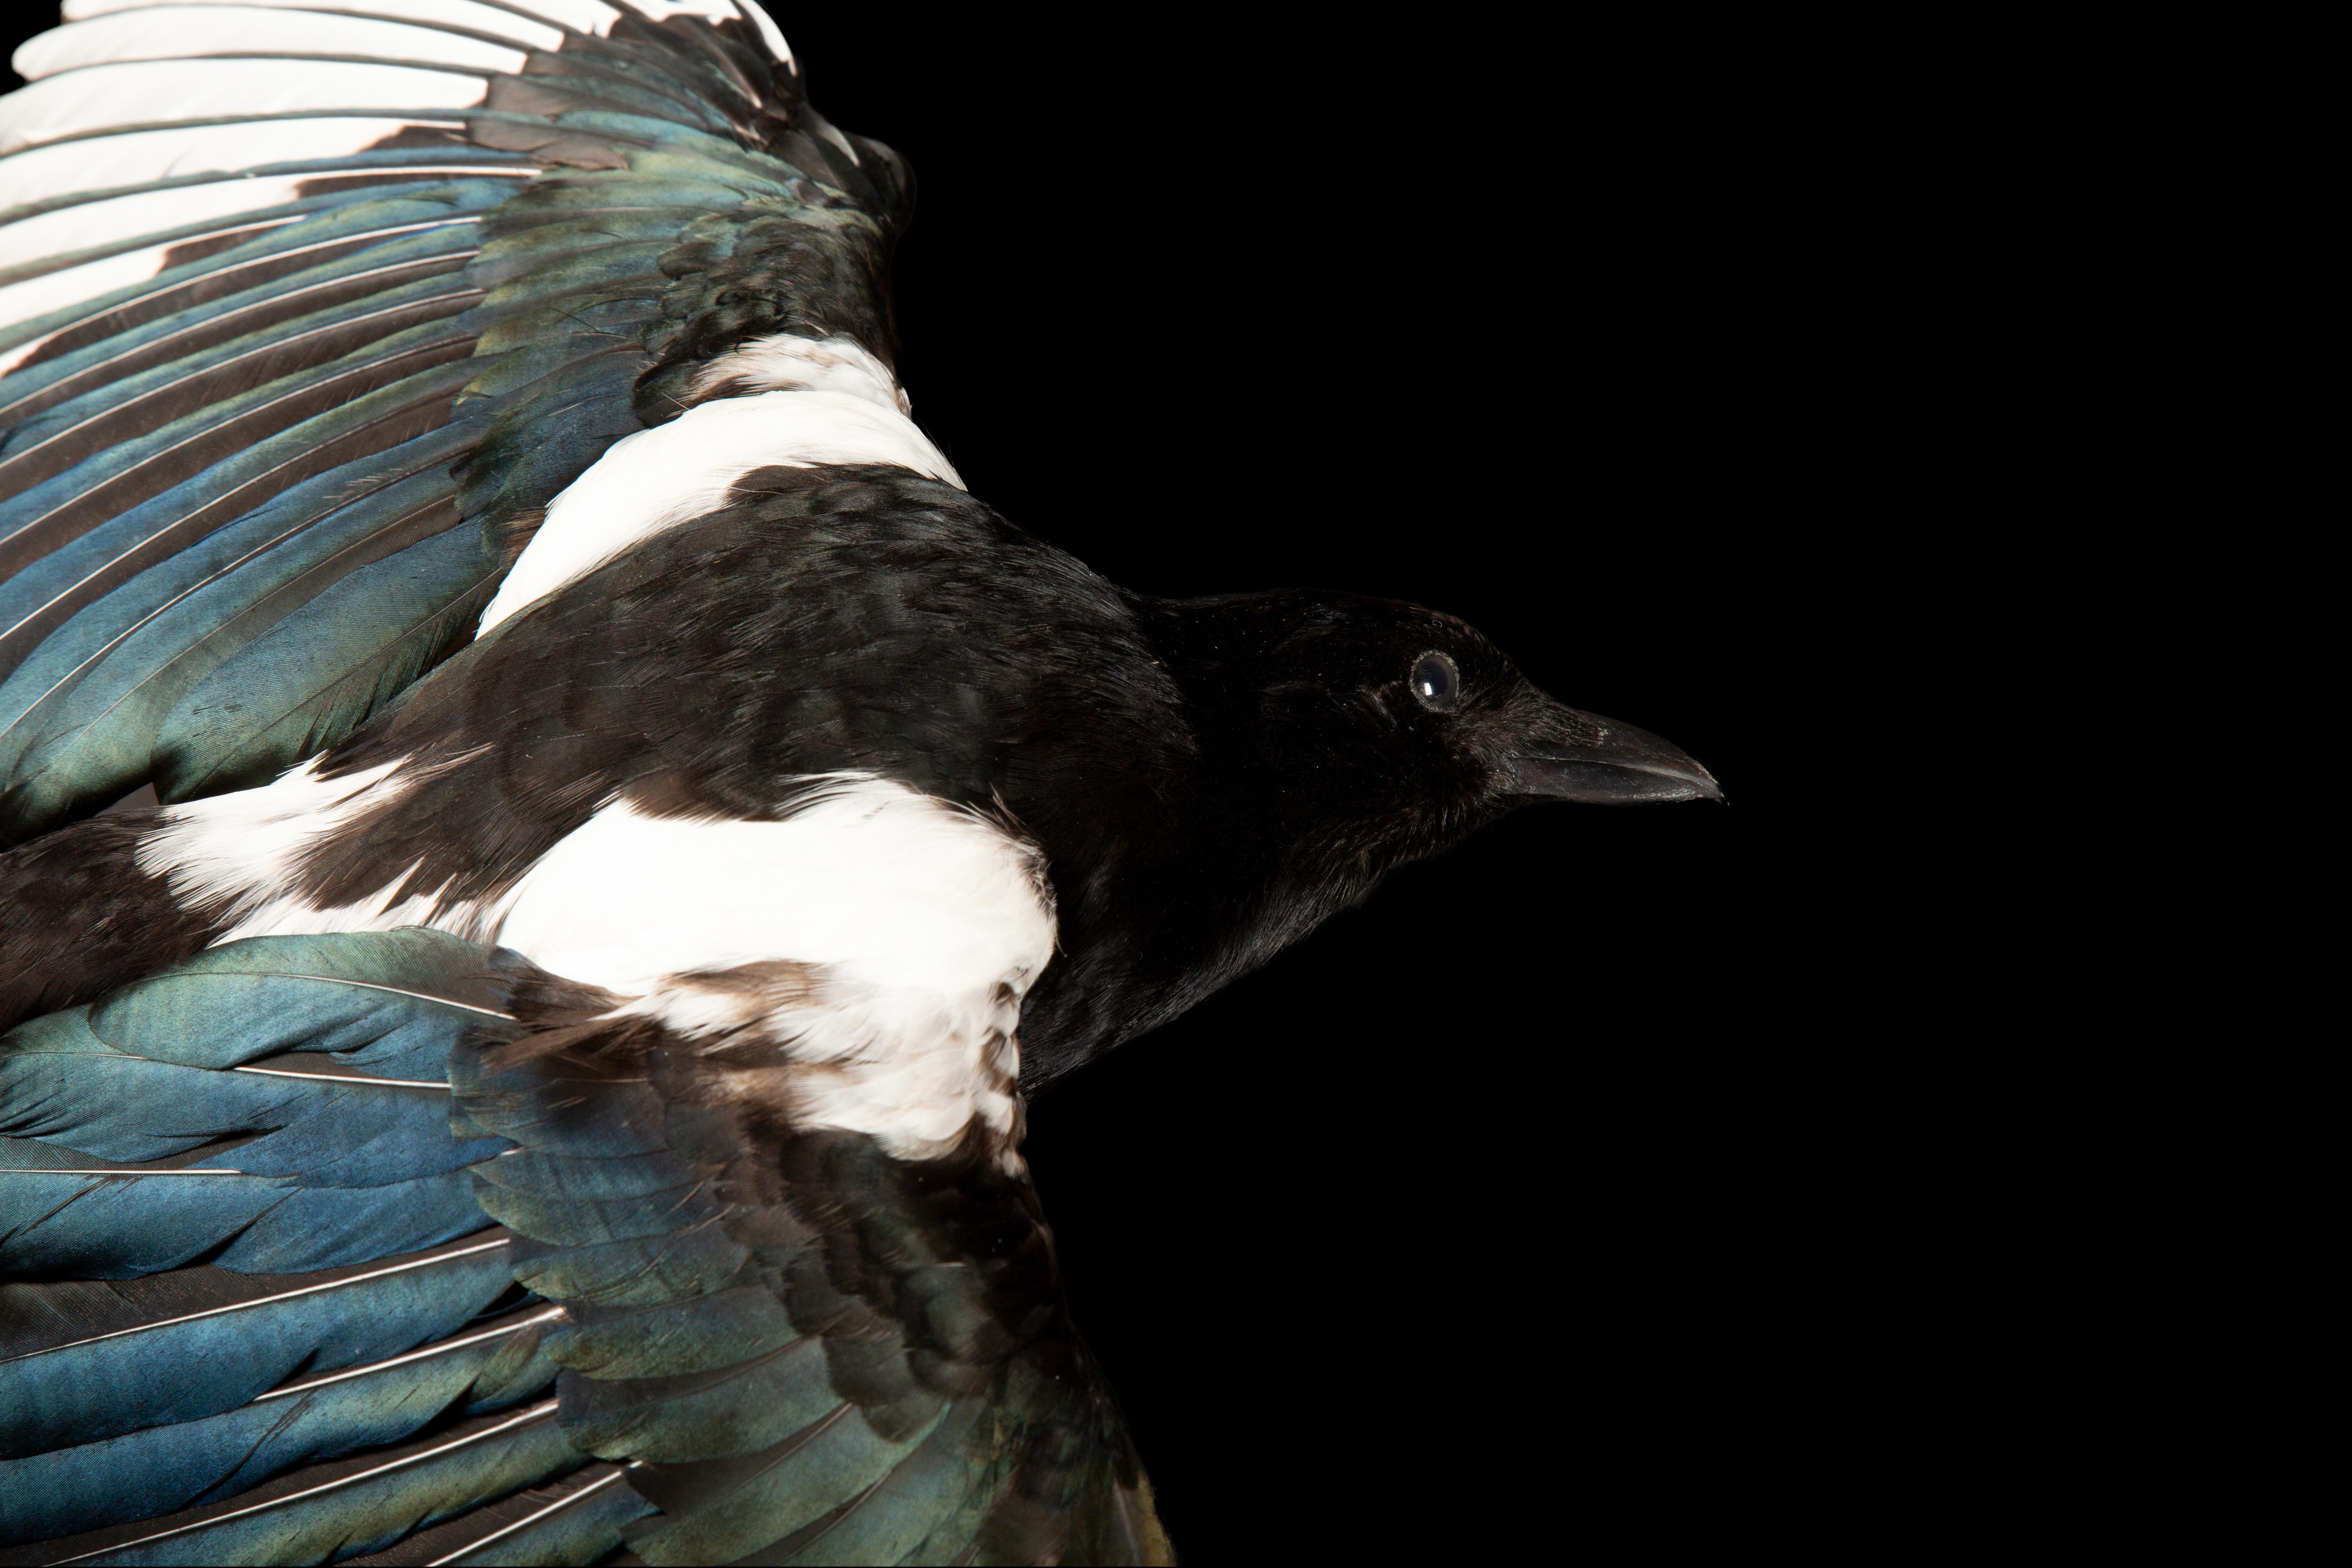 Victorian Exquisite Taxidermy: The Eurasian Magpie - A Captivating Avian Specimen